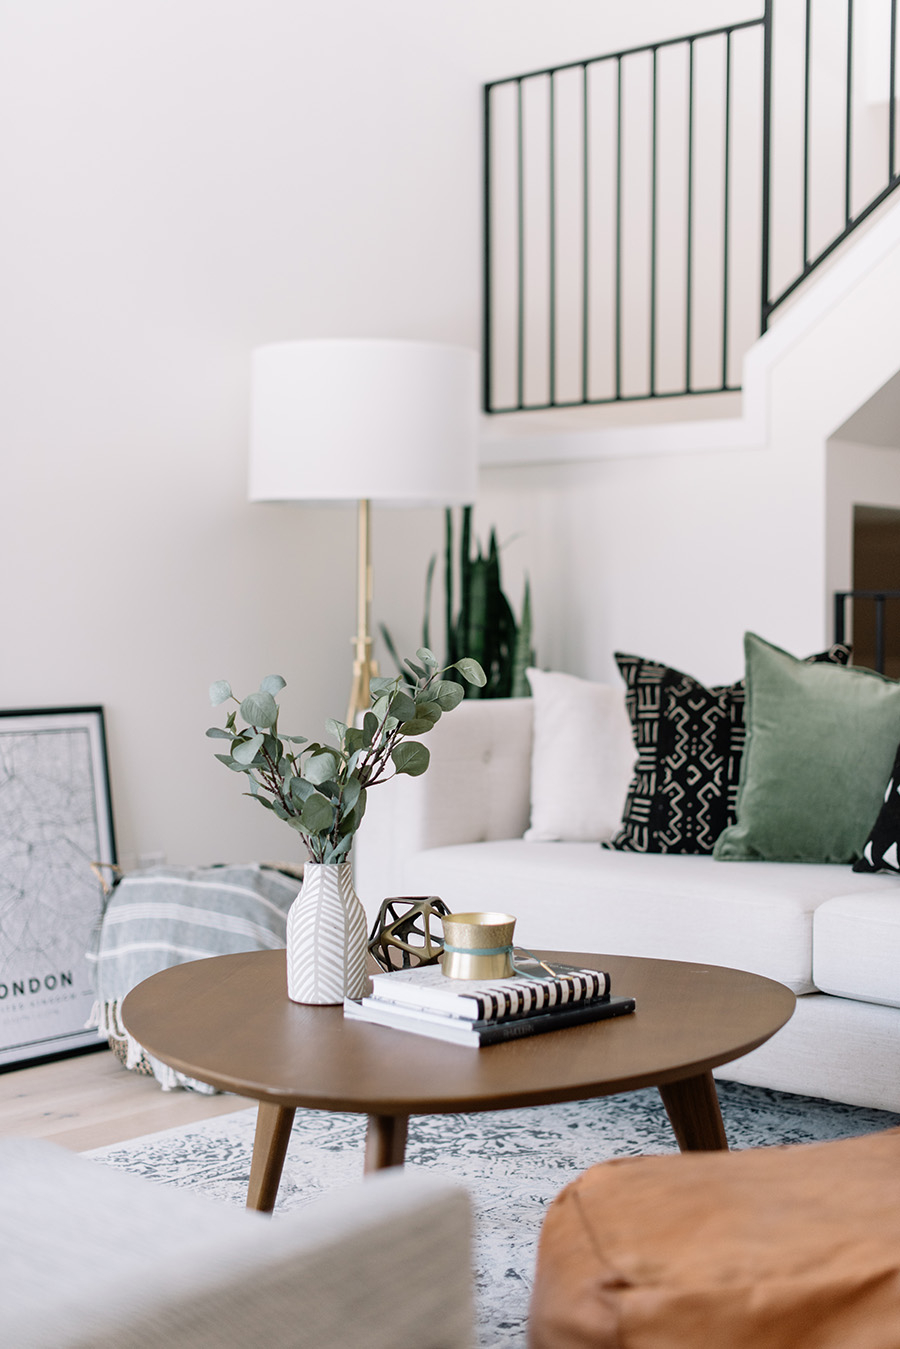 Origami Coffee Table West Elm The Best Coffee Tables For Every Budget The Everygirl